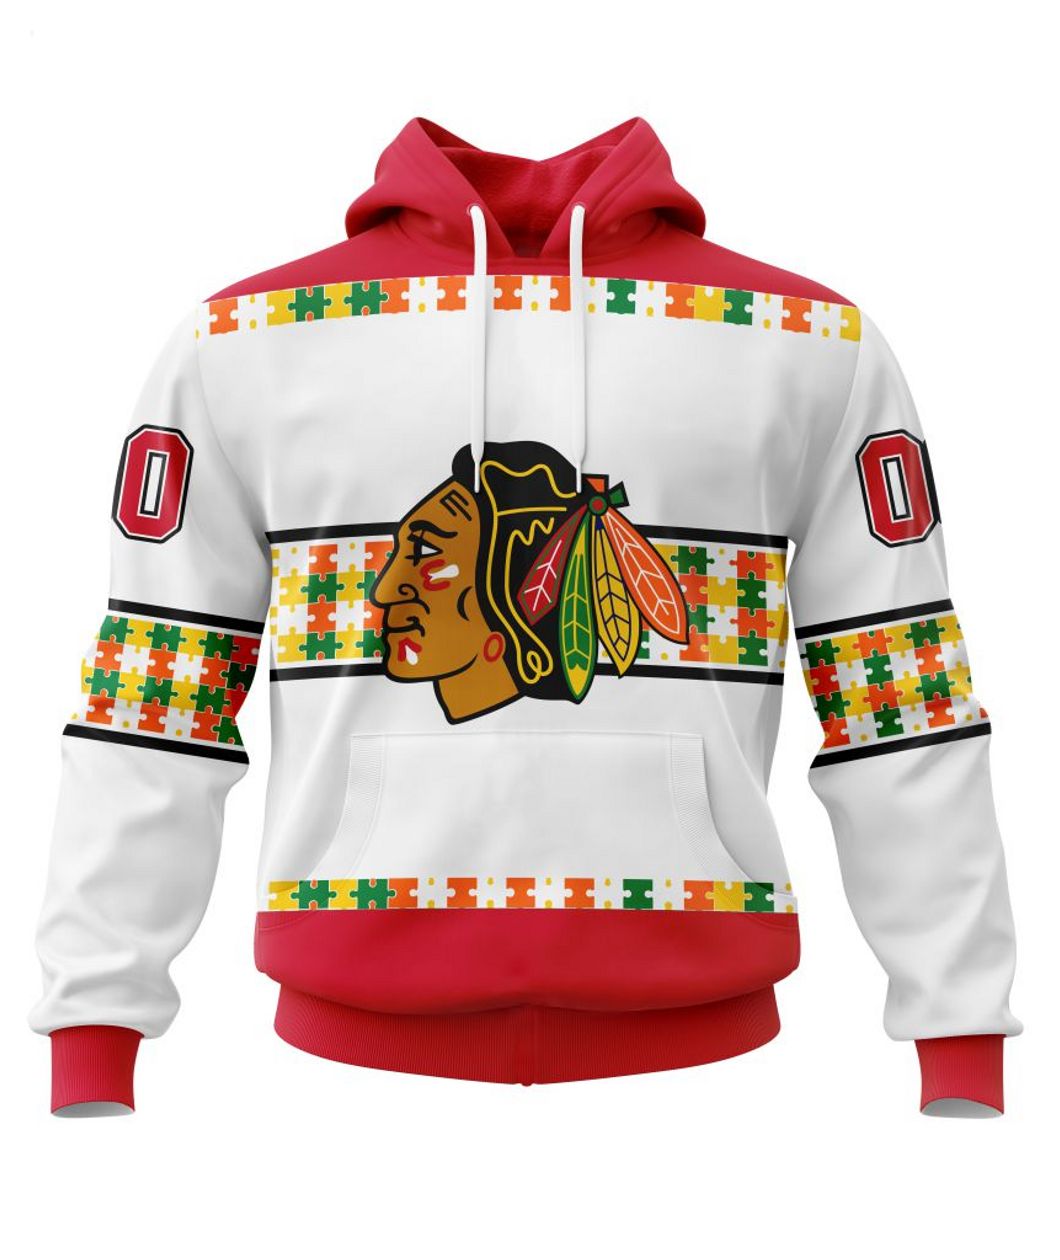 Personalized NHL Chicago BlackHawks Fights Cancer 3d shirt, hoodie -  LIMITED EDITION